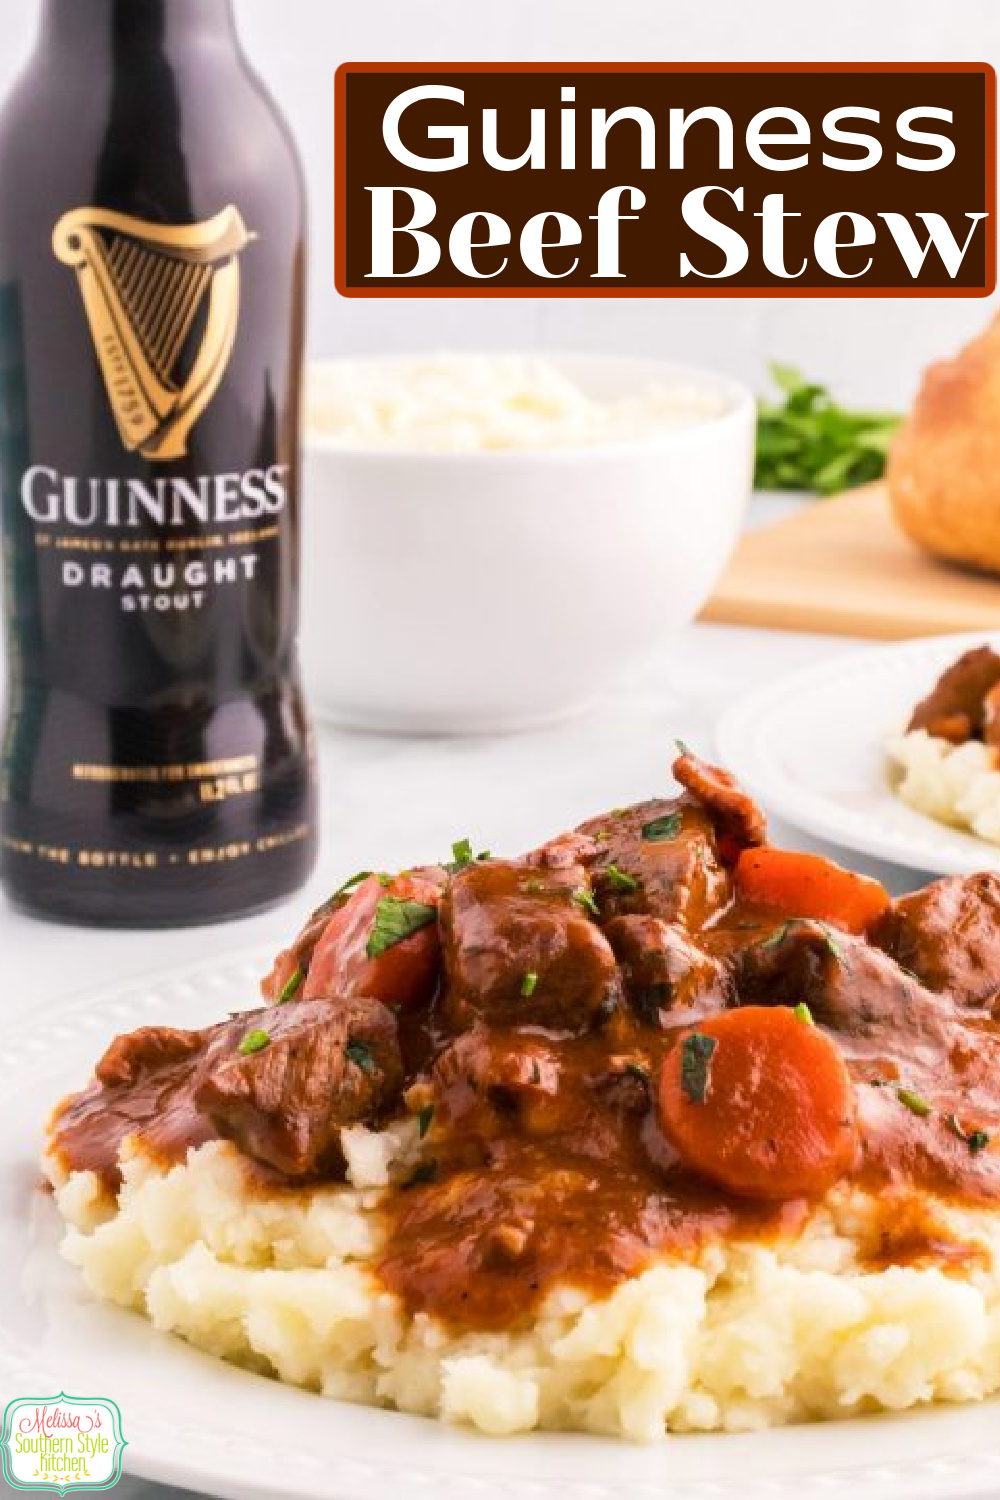 This mouthwatering Guinness Beef Stew features a rich full bodied broth that's perfectly seasoned and filled with fresh vegetables #guinnessstew #guinnessbeefstew #beefrecipes #stew #easybeefstew #guinness #stpatricksday #stpatricksdayrecipes via @melissasssk